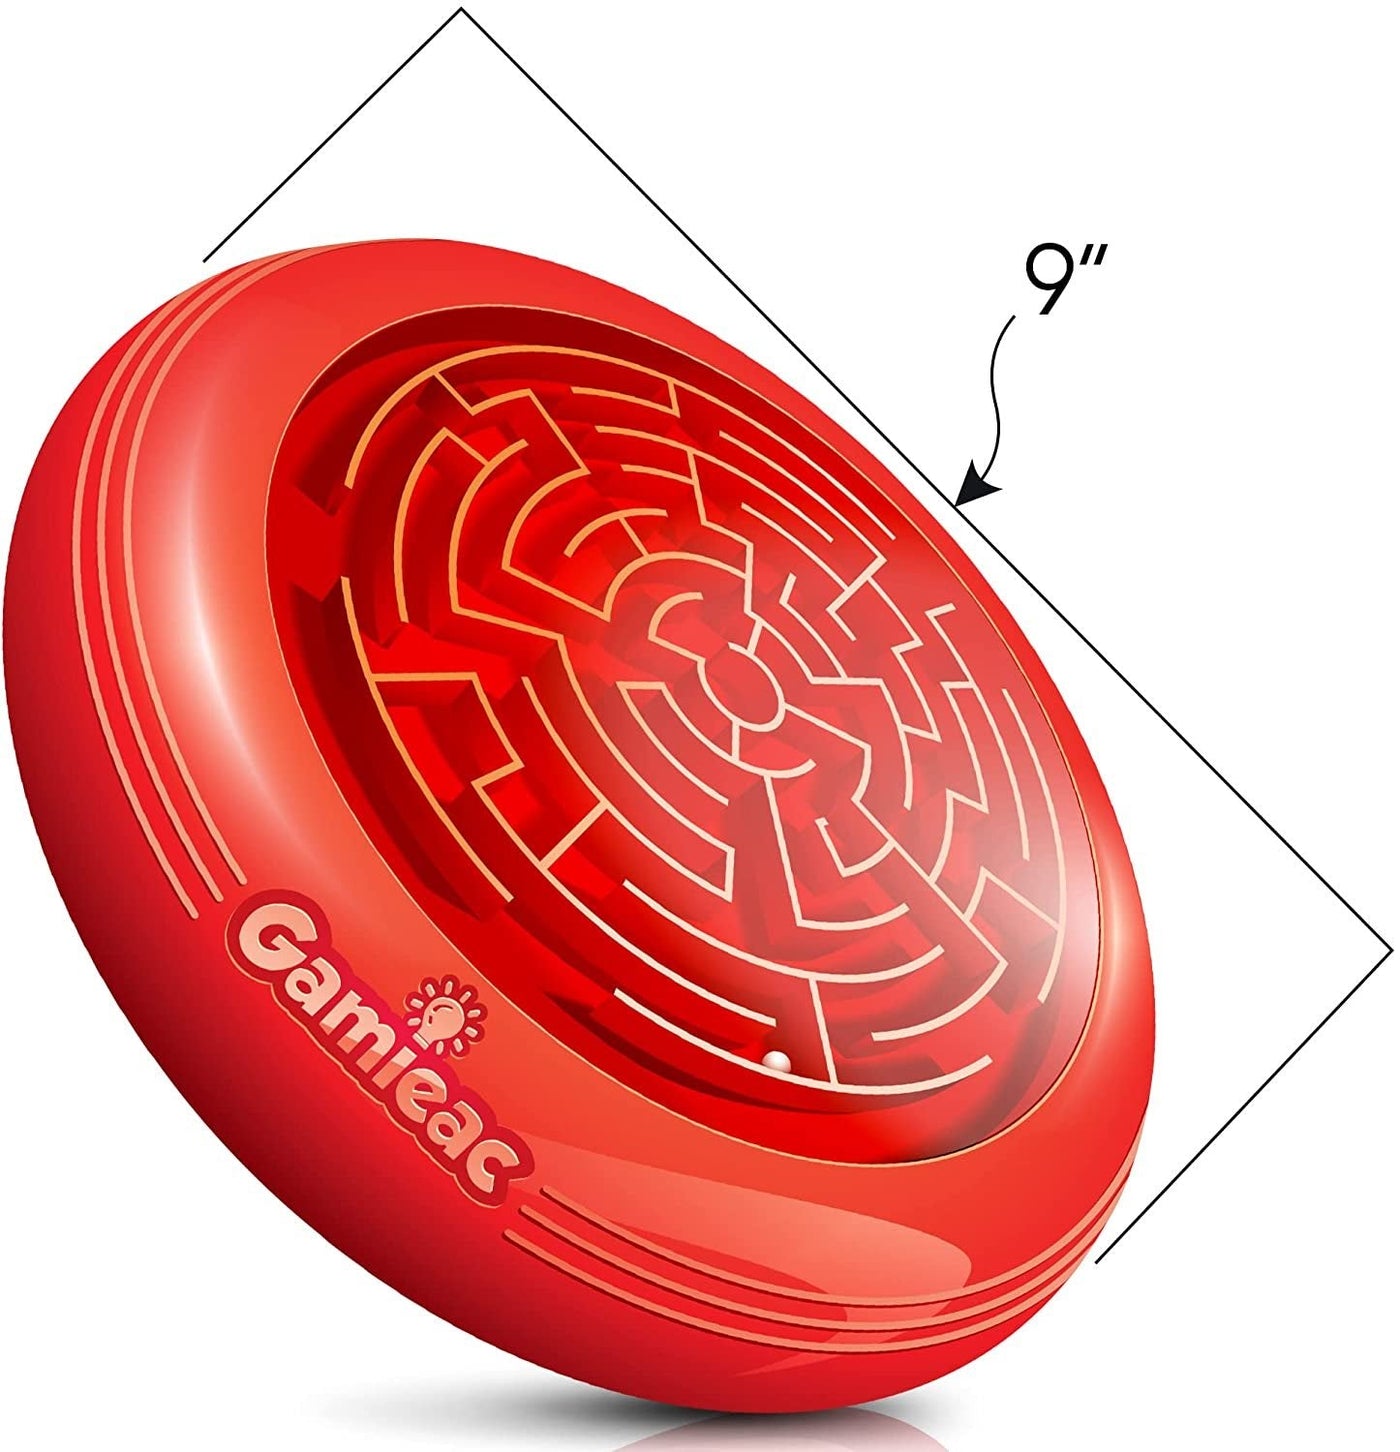 Flying Maze, 2 in 1 Game Set, Outdoor Flying Disc with Ball Maze Inside. Works as Both Indoor & Outdoor Toy for Kids, Great for Backyard, Beach, & Inside Fun, Official Size & Weight: 9” - 175g